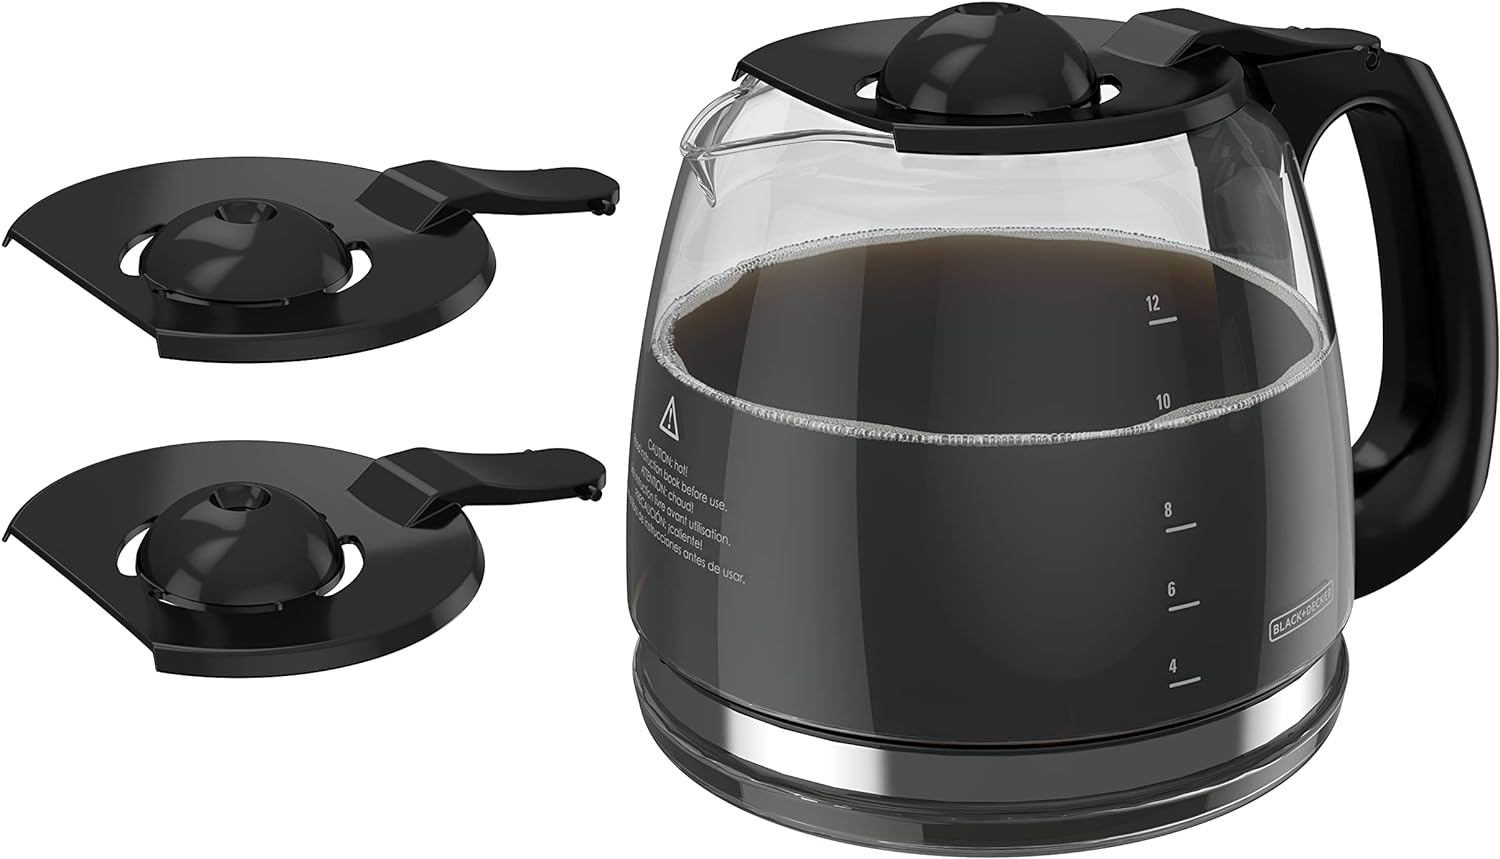 They had three lids which adjusts for the coffee maker with the 